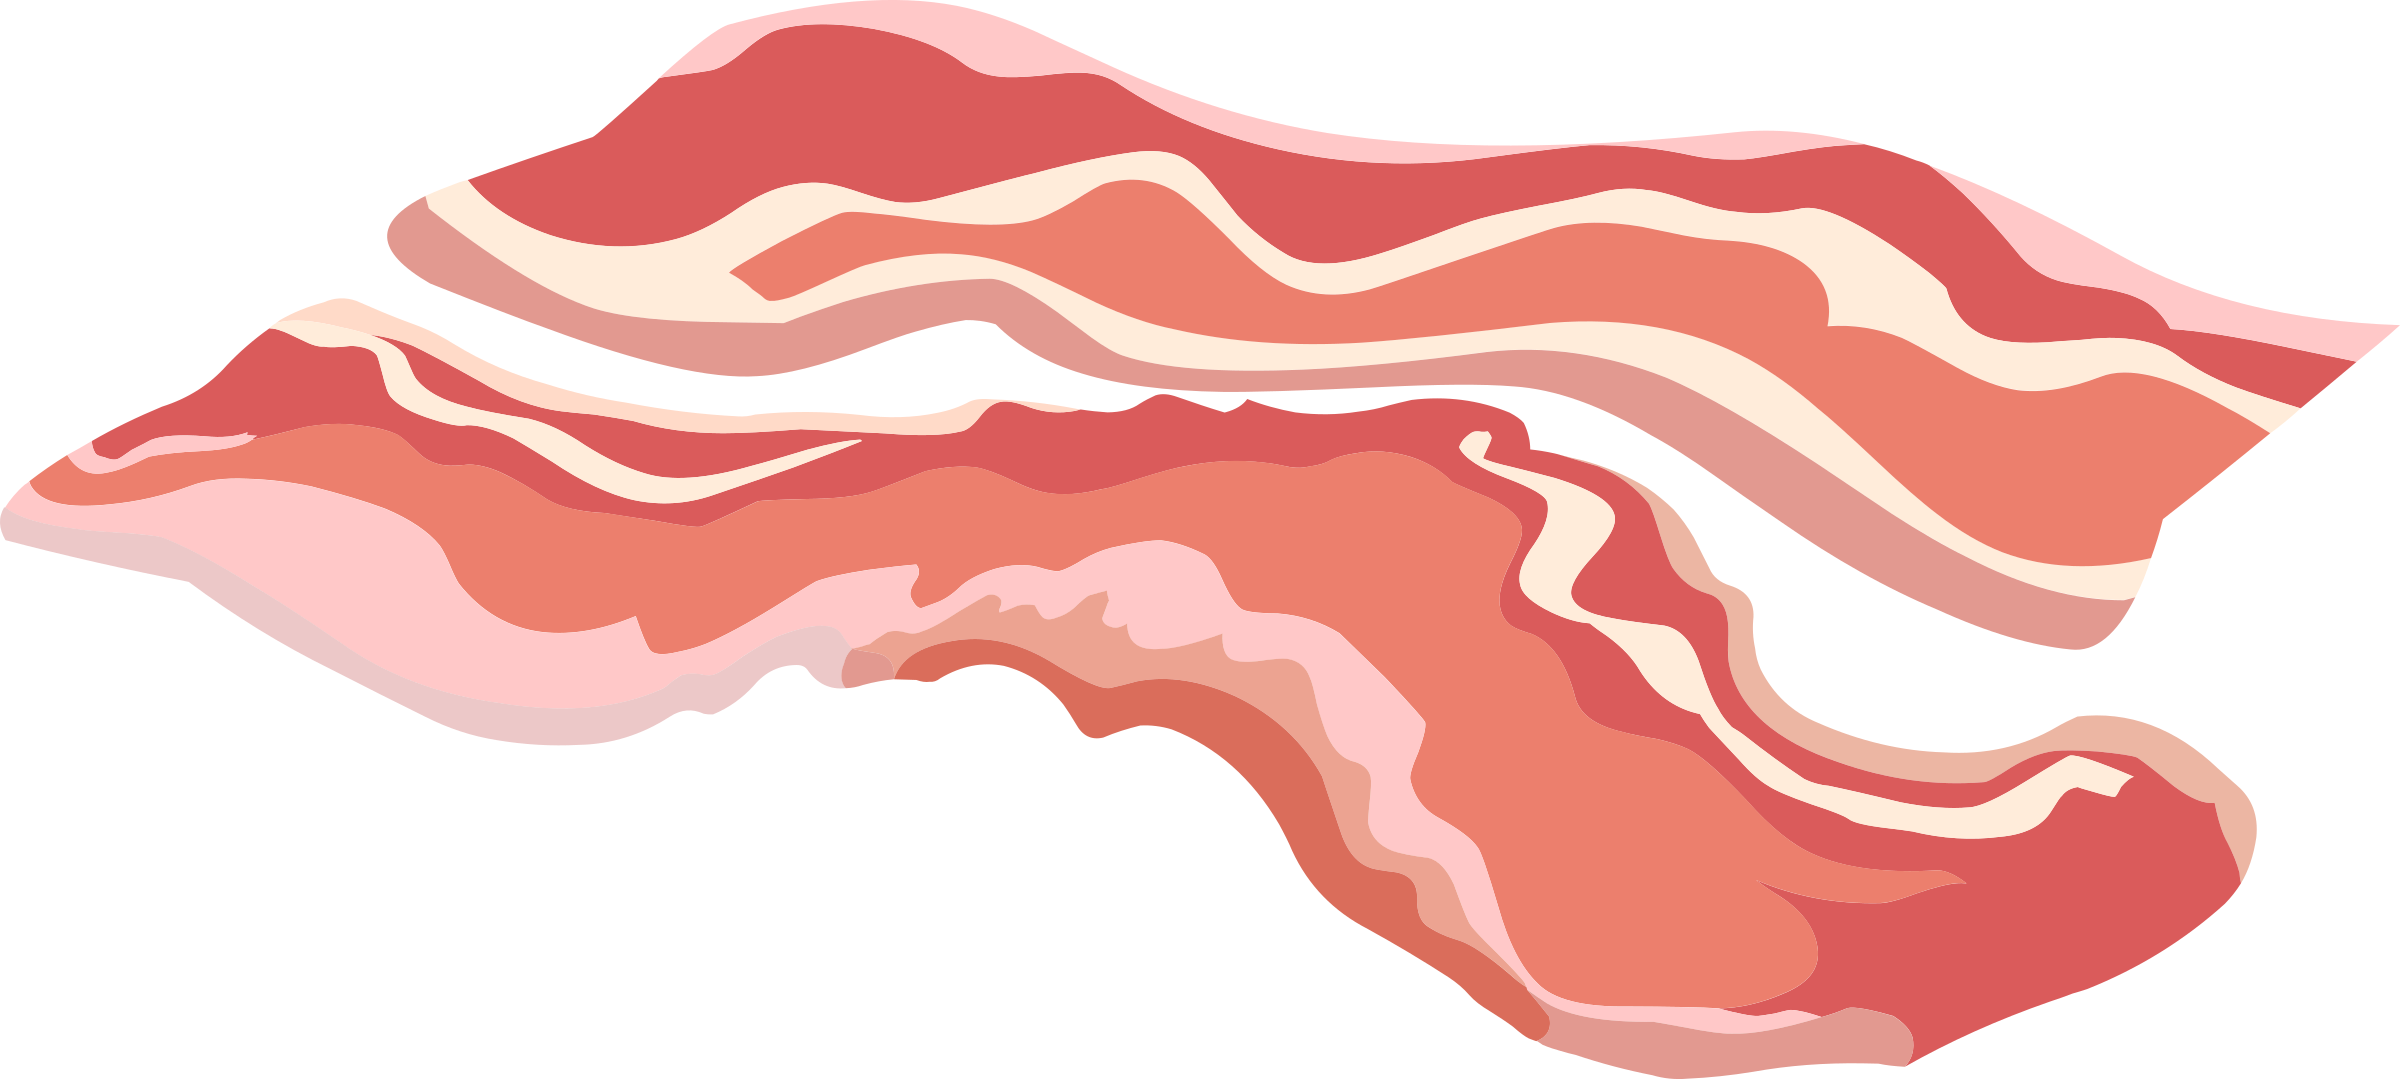 Bacon png images transparent. Fat clipart food project